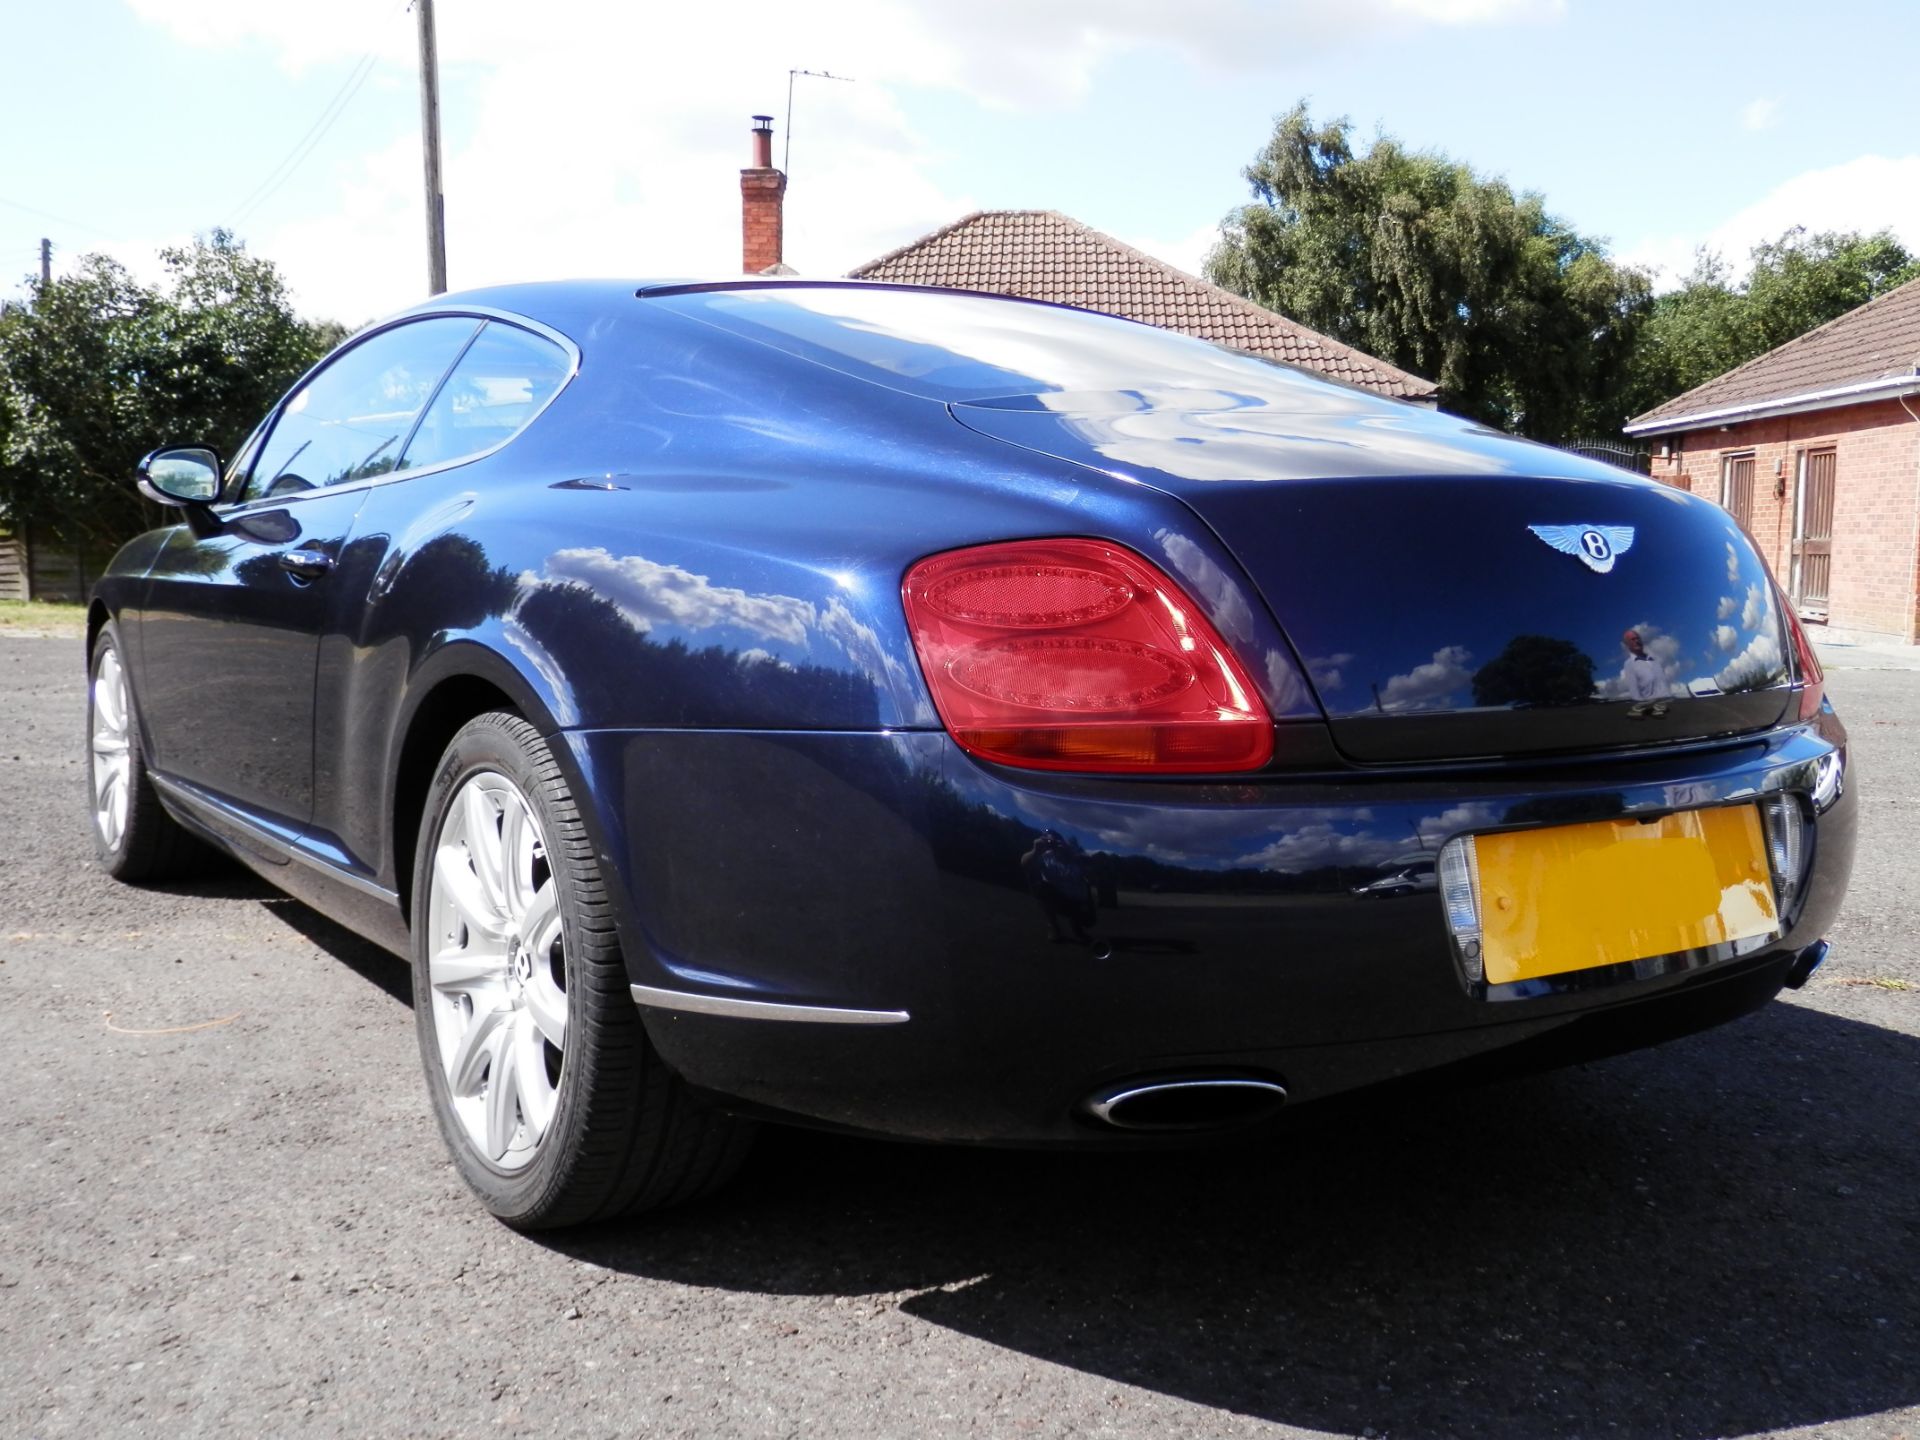 STUNNING 2007 BENTLEY GT CONTINENTAL, 6.0L TWIN TURBO,35K MILES, BLUE, CREAM LEATHER, FULL HISTORY. - Image 6 of 53